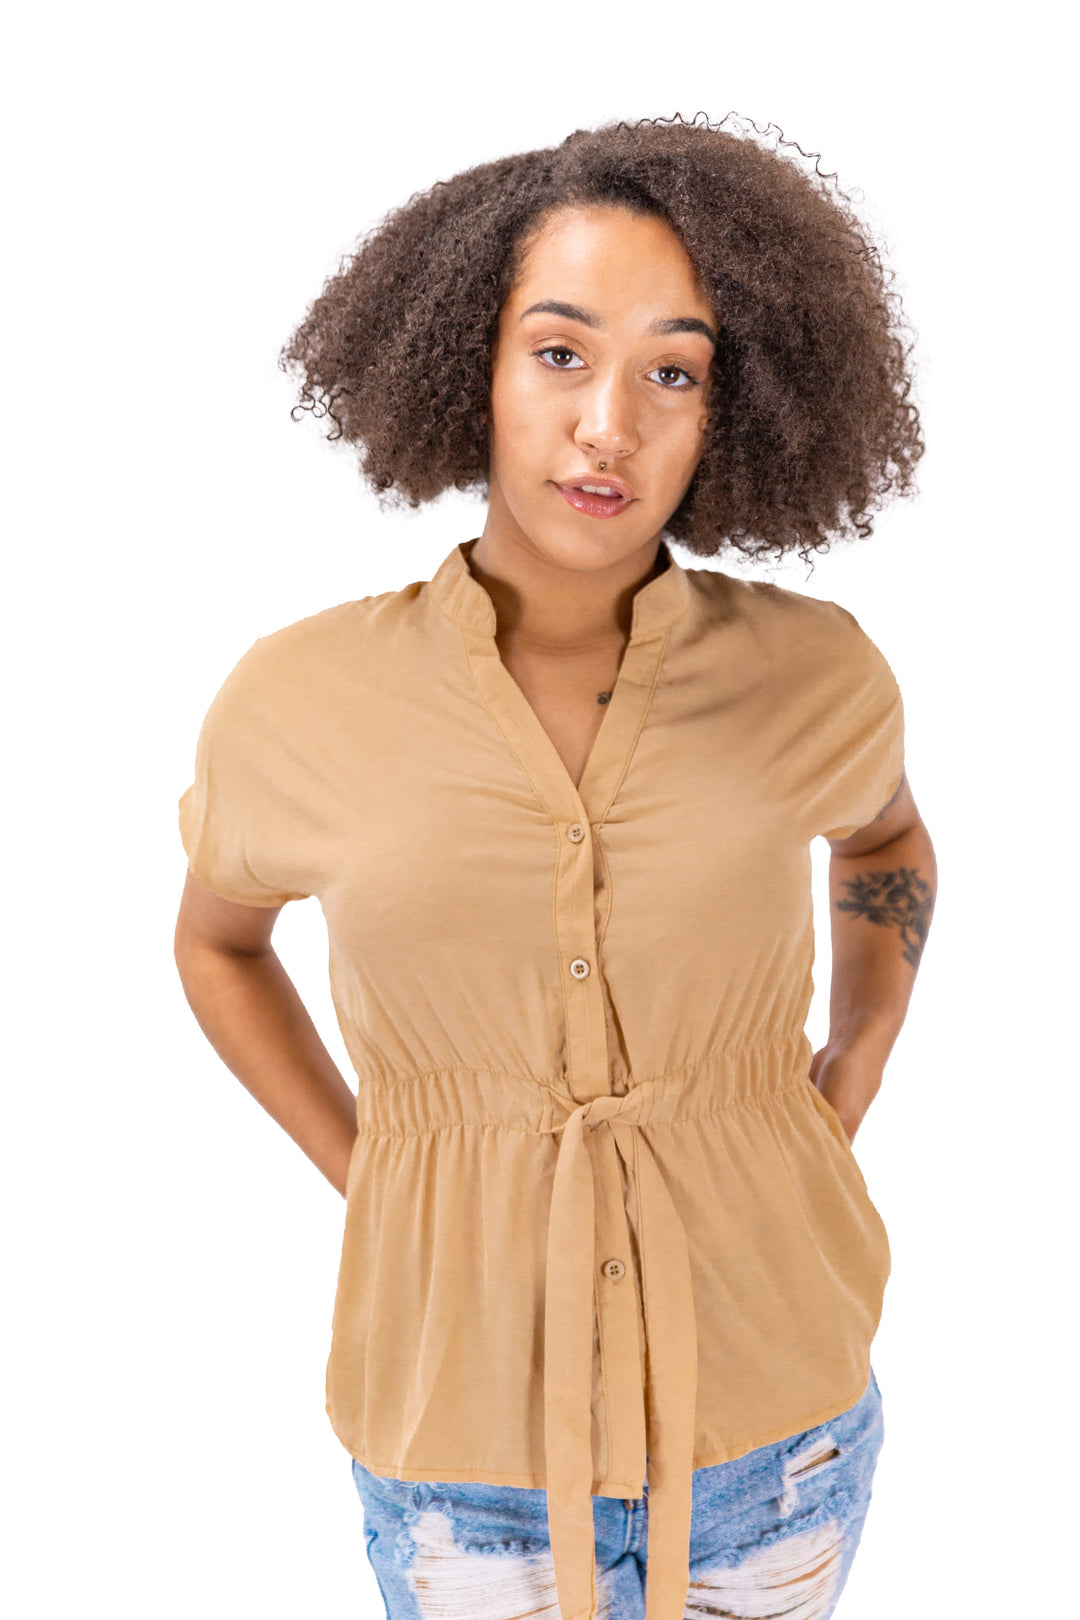 Fabonics Laced Allure Brown Casual Top with Button Front and Lace Waist Tie in Elegant Style